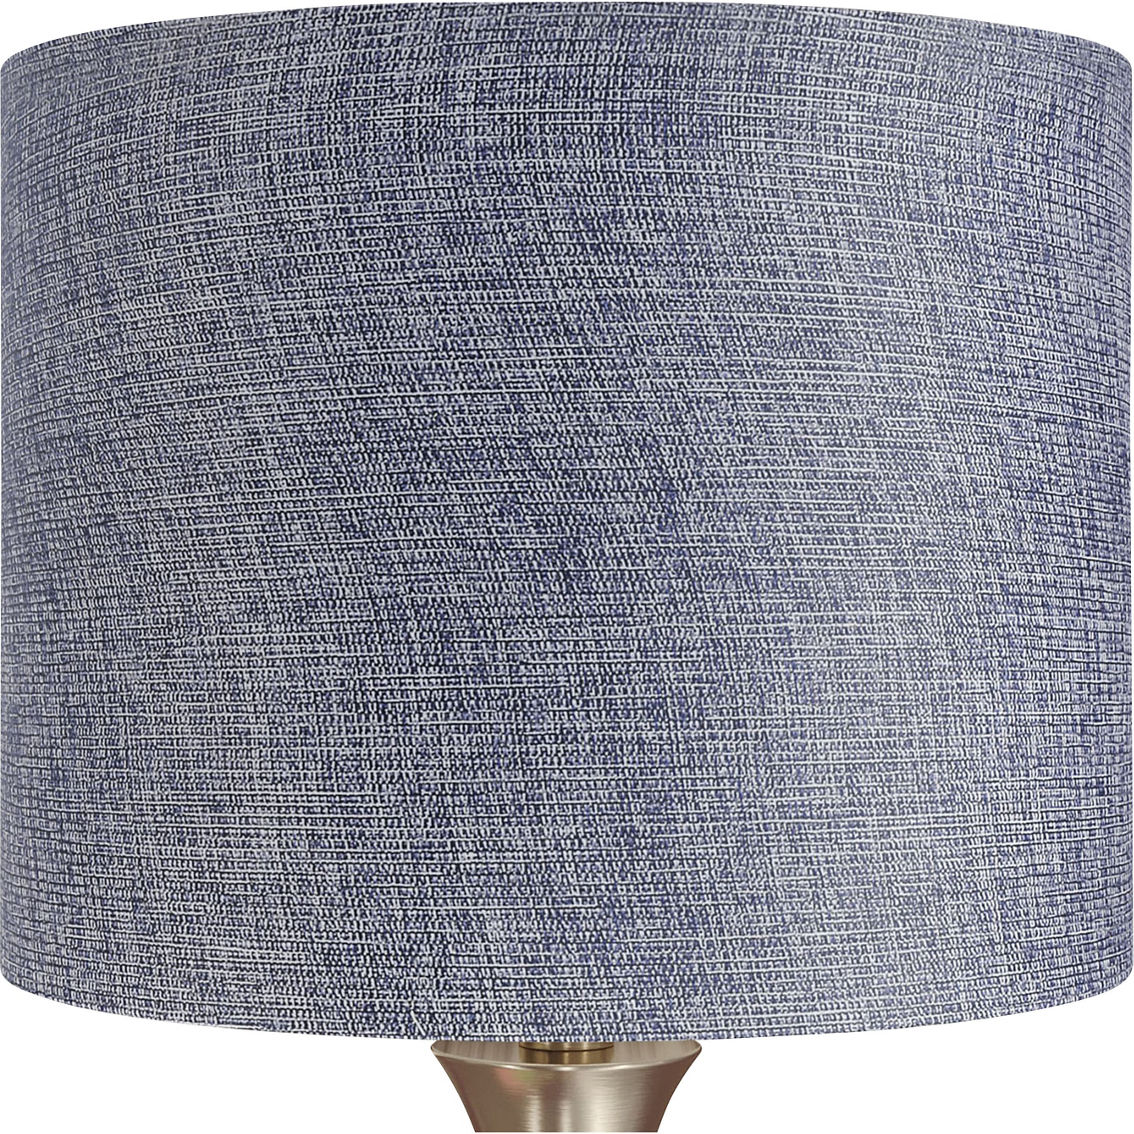 LumiSource Lenuxe 24.25 in. Metal Table Lamps 2 pk. - Image 5 of 9